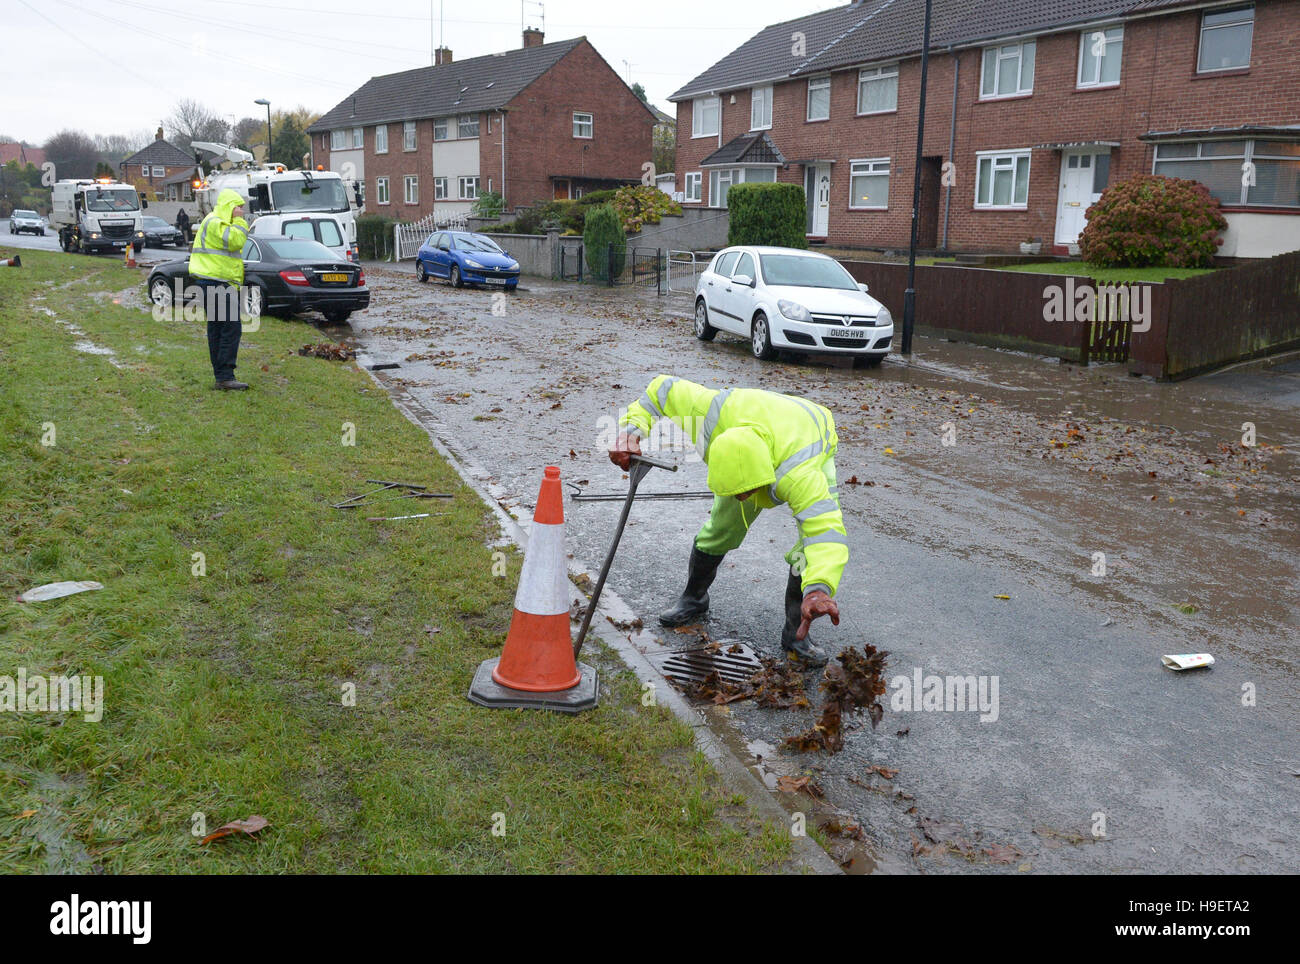 The clean up begins in Whitchurch Lane, Bristol, after heavy rain overnight, as wind and rain continue to blight parts of Britain threatening further travel chaos after torrential downpours caused flash-flooding and disruption across most of the country. Stock Photo